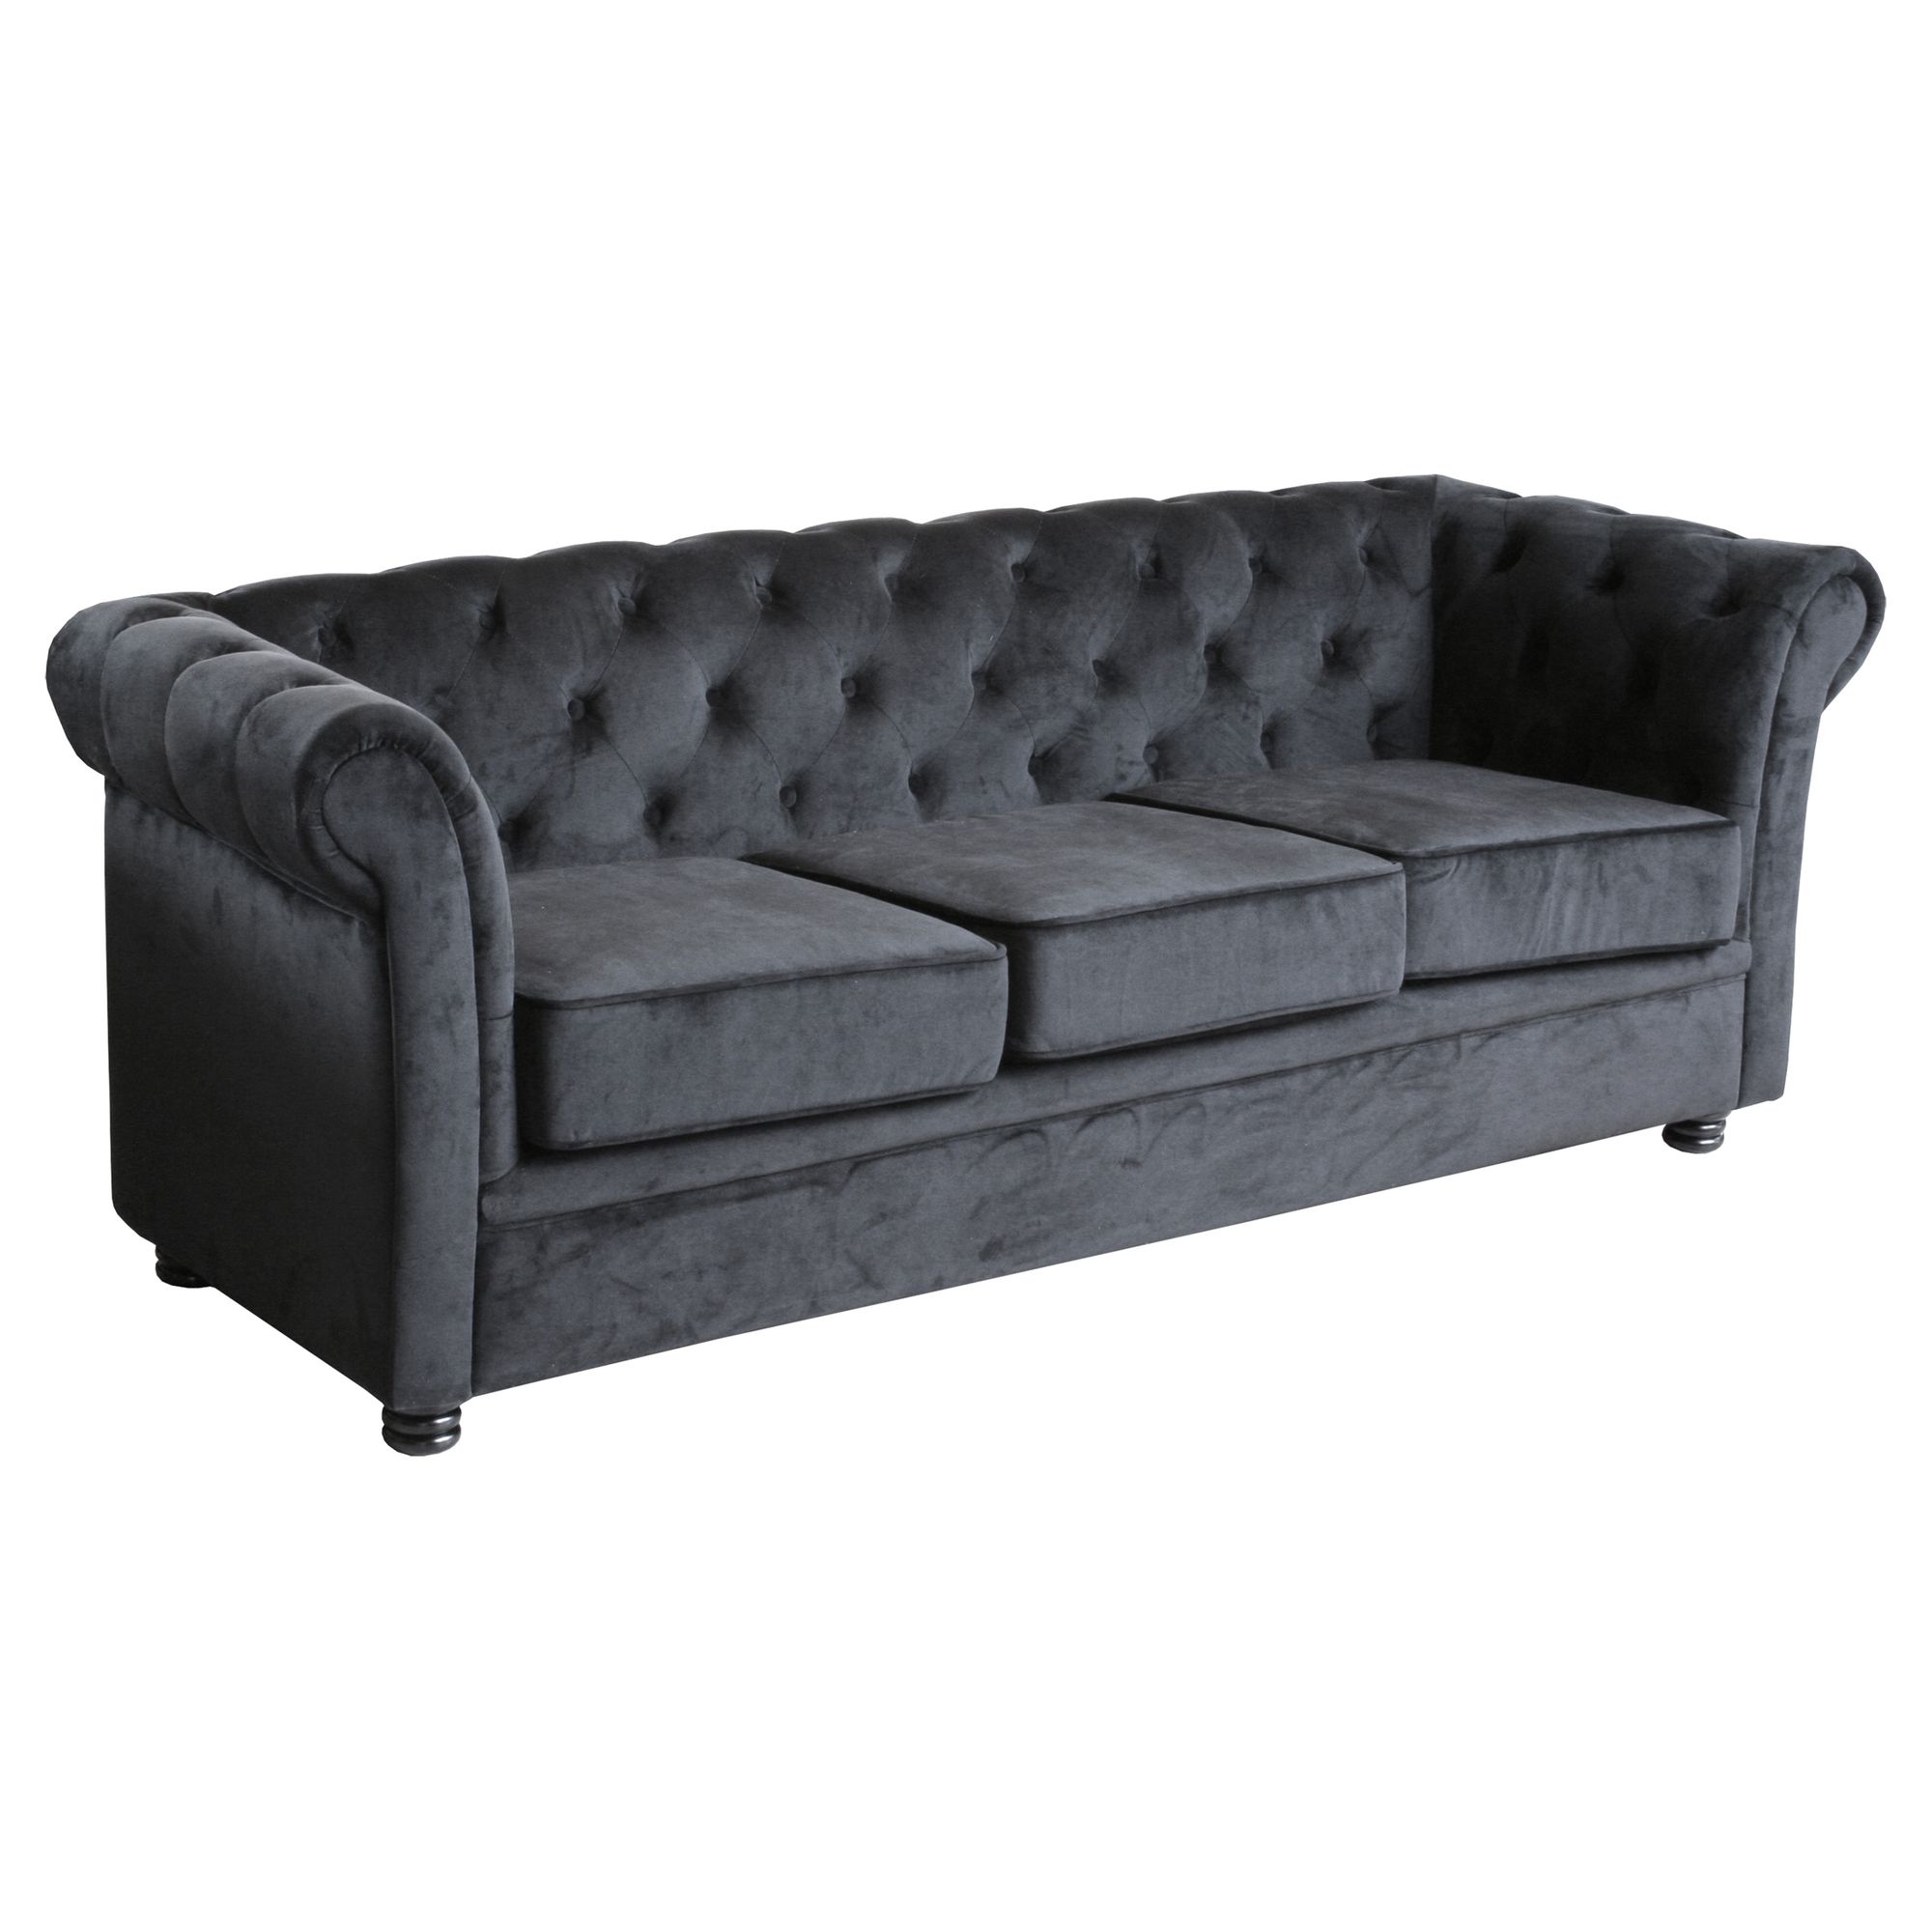 Home Essence Chester Fabric 3 Seater at Tesco Direct